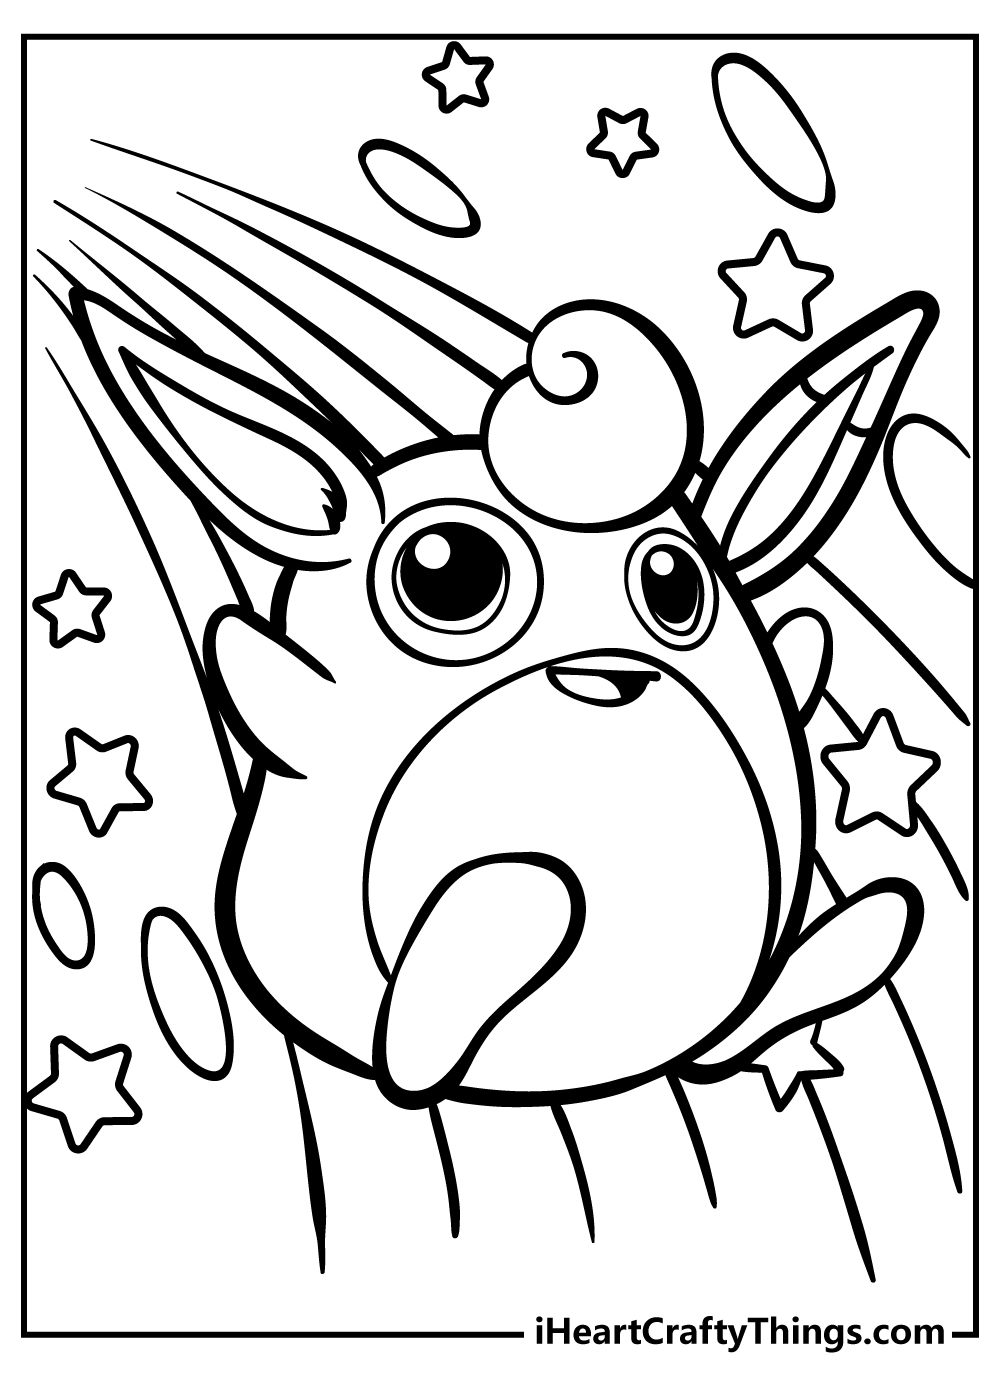 Pokemon Coloring Book for adults free download